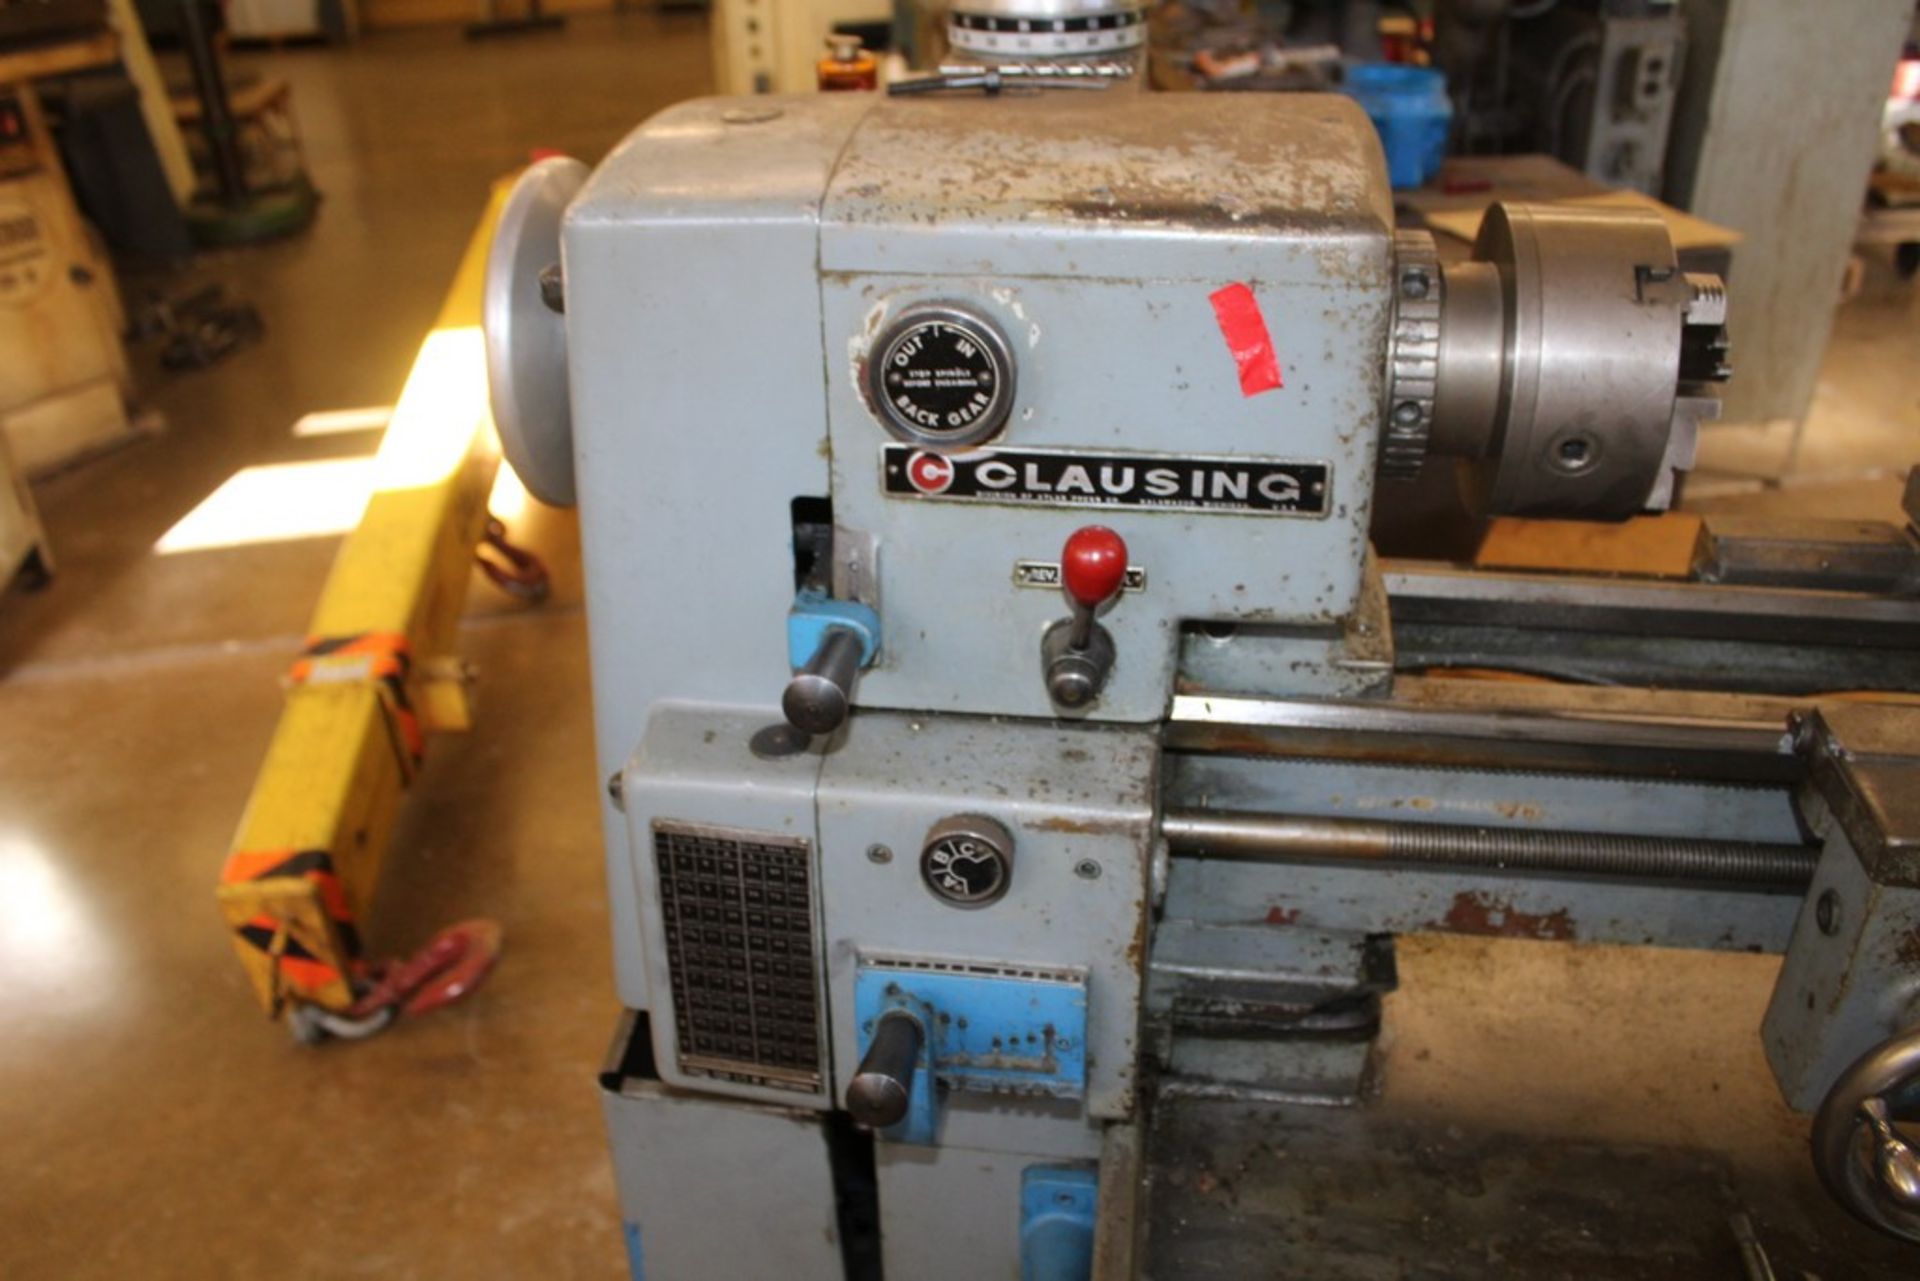 CLAUSING 12"X36" MODEL 5914 TOOLROOM LATHE, S/N 501411, 2,000 RPM SPINDLE, WITH 3-JAW CHUCK, INCH - Image 6 of 6